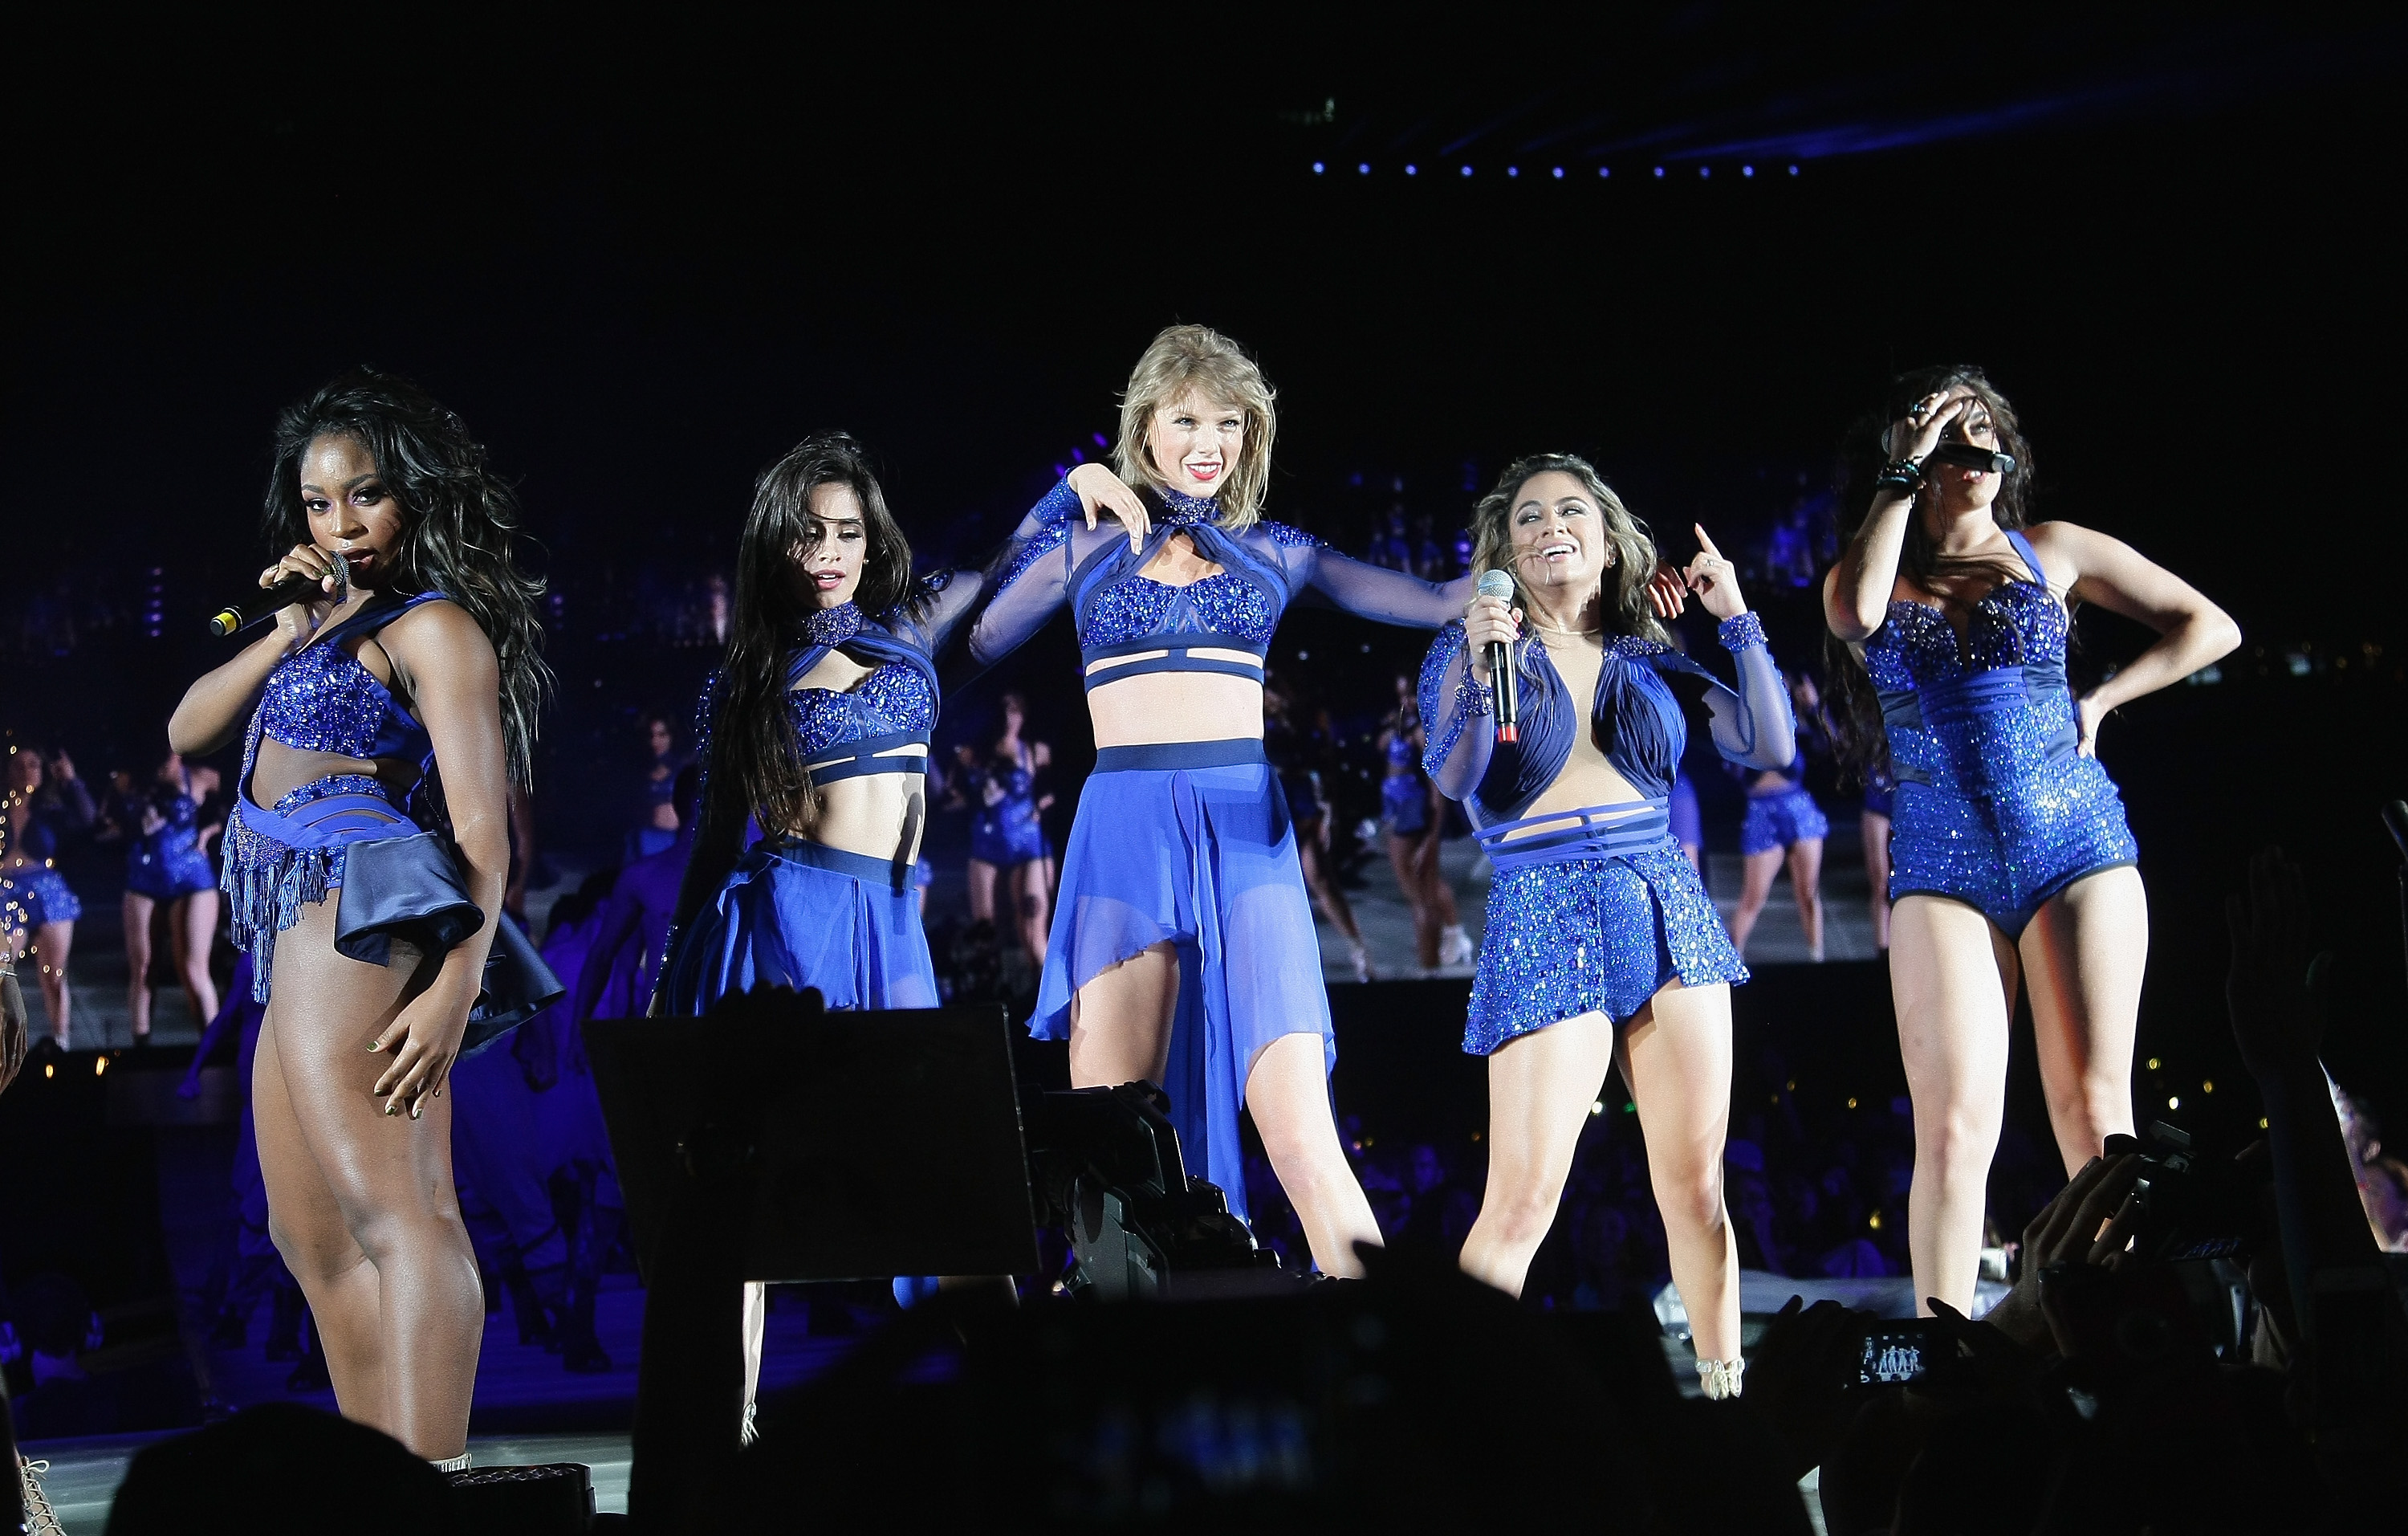 Taylor Swift and Fifth Harmony perform at Levi's Stadium in Santa Clara, Calif. on August 14, 2015. (John Medina—Getty Images)